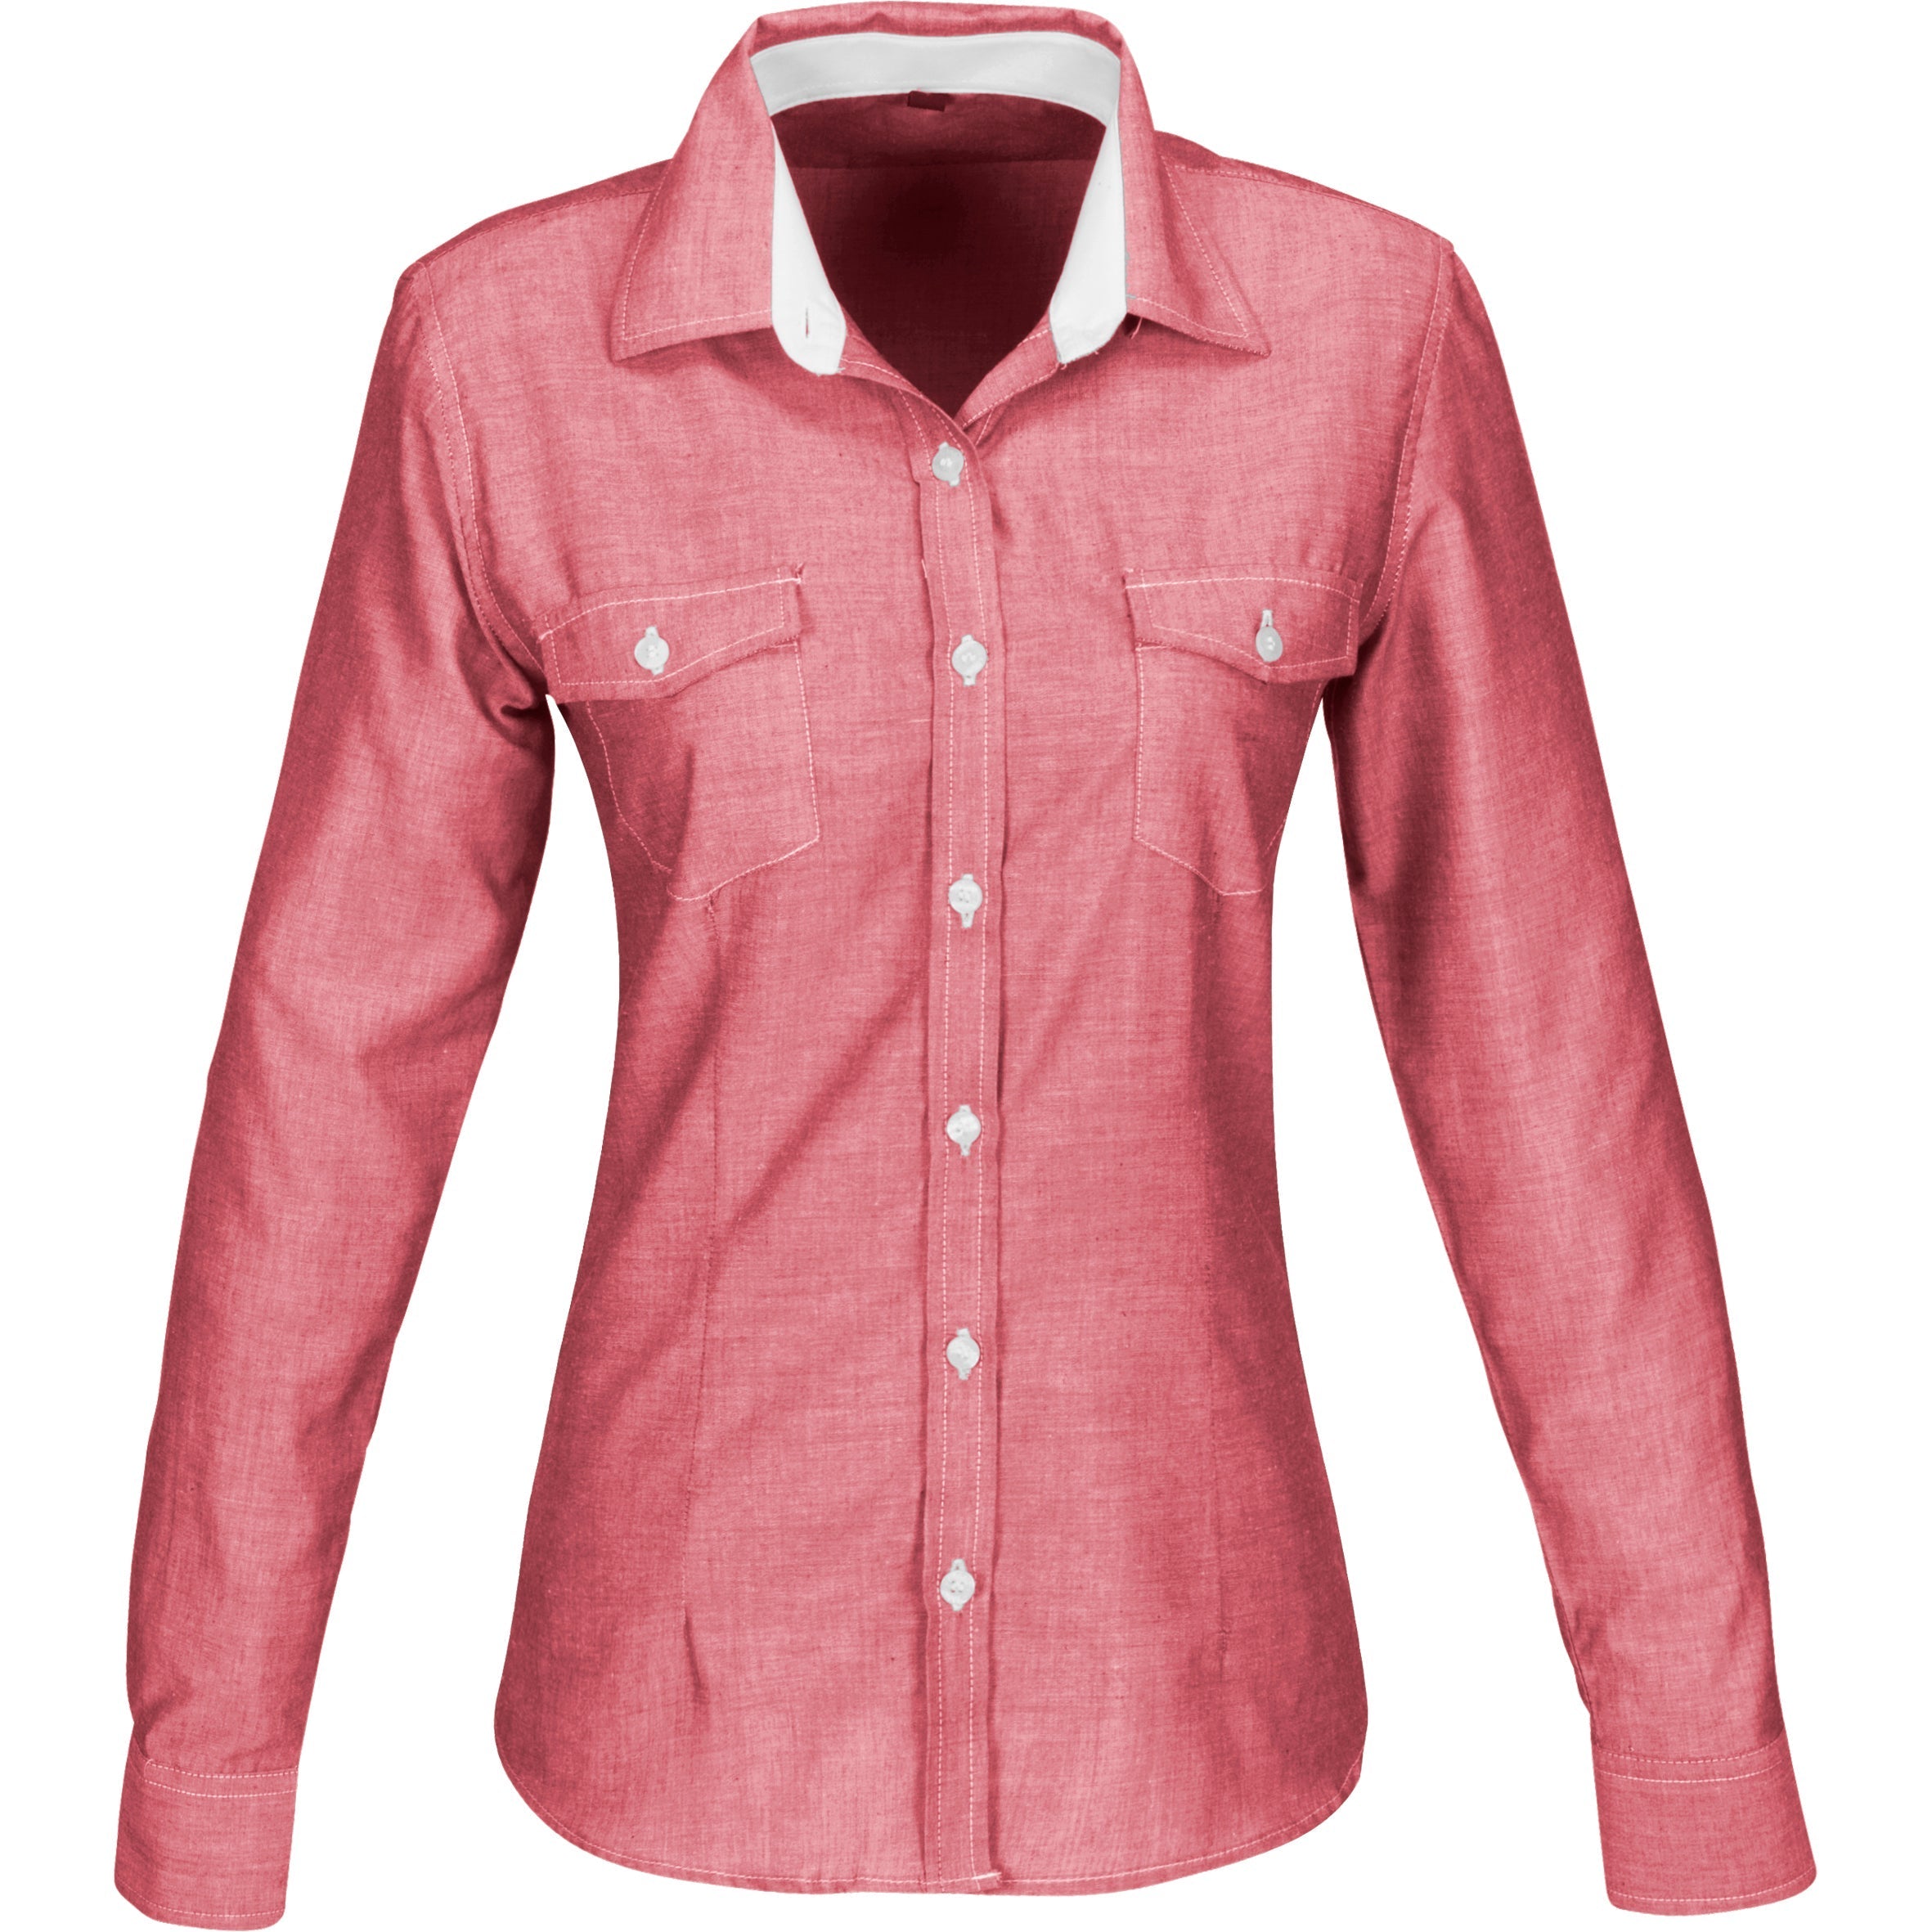 Ladies Long Sleeve Windsor Shirt - Light Blue Only-2XL-Red-R